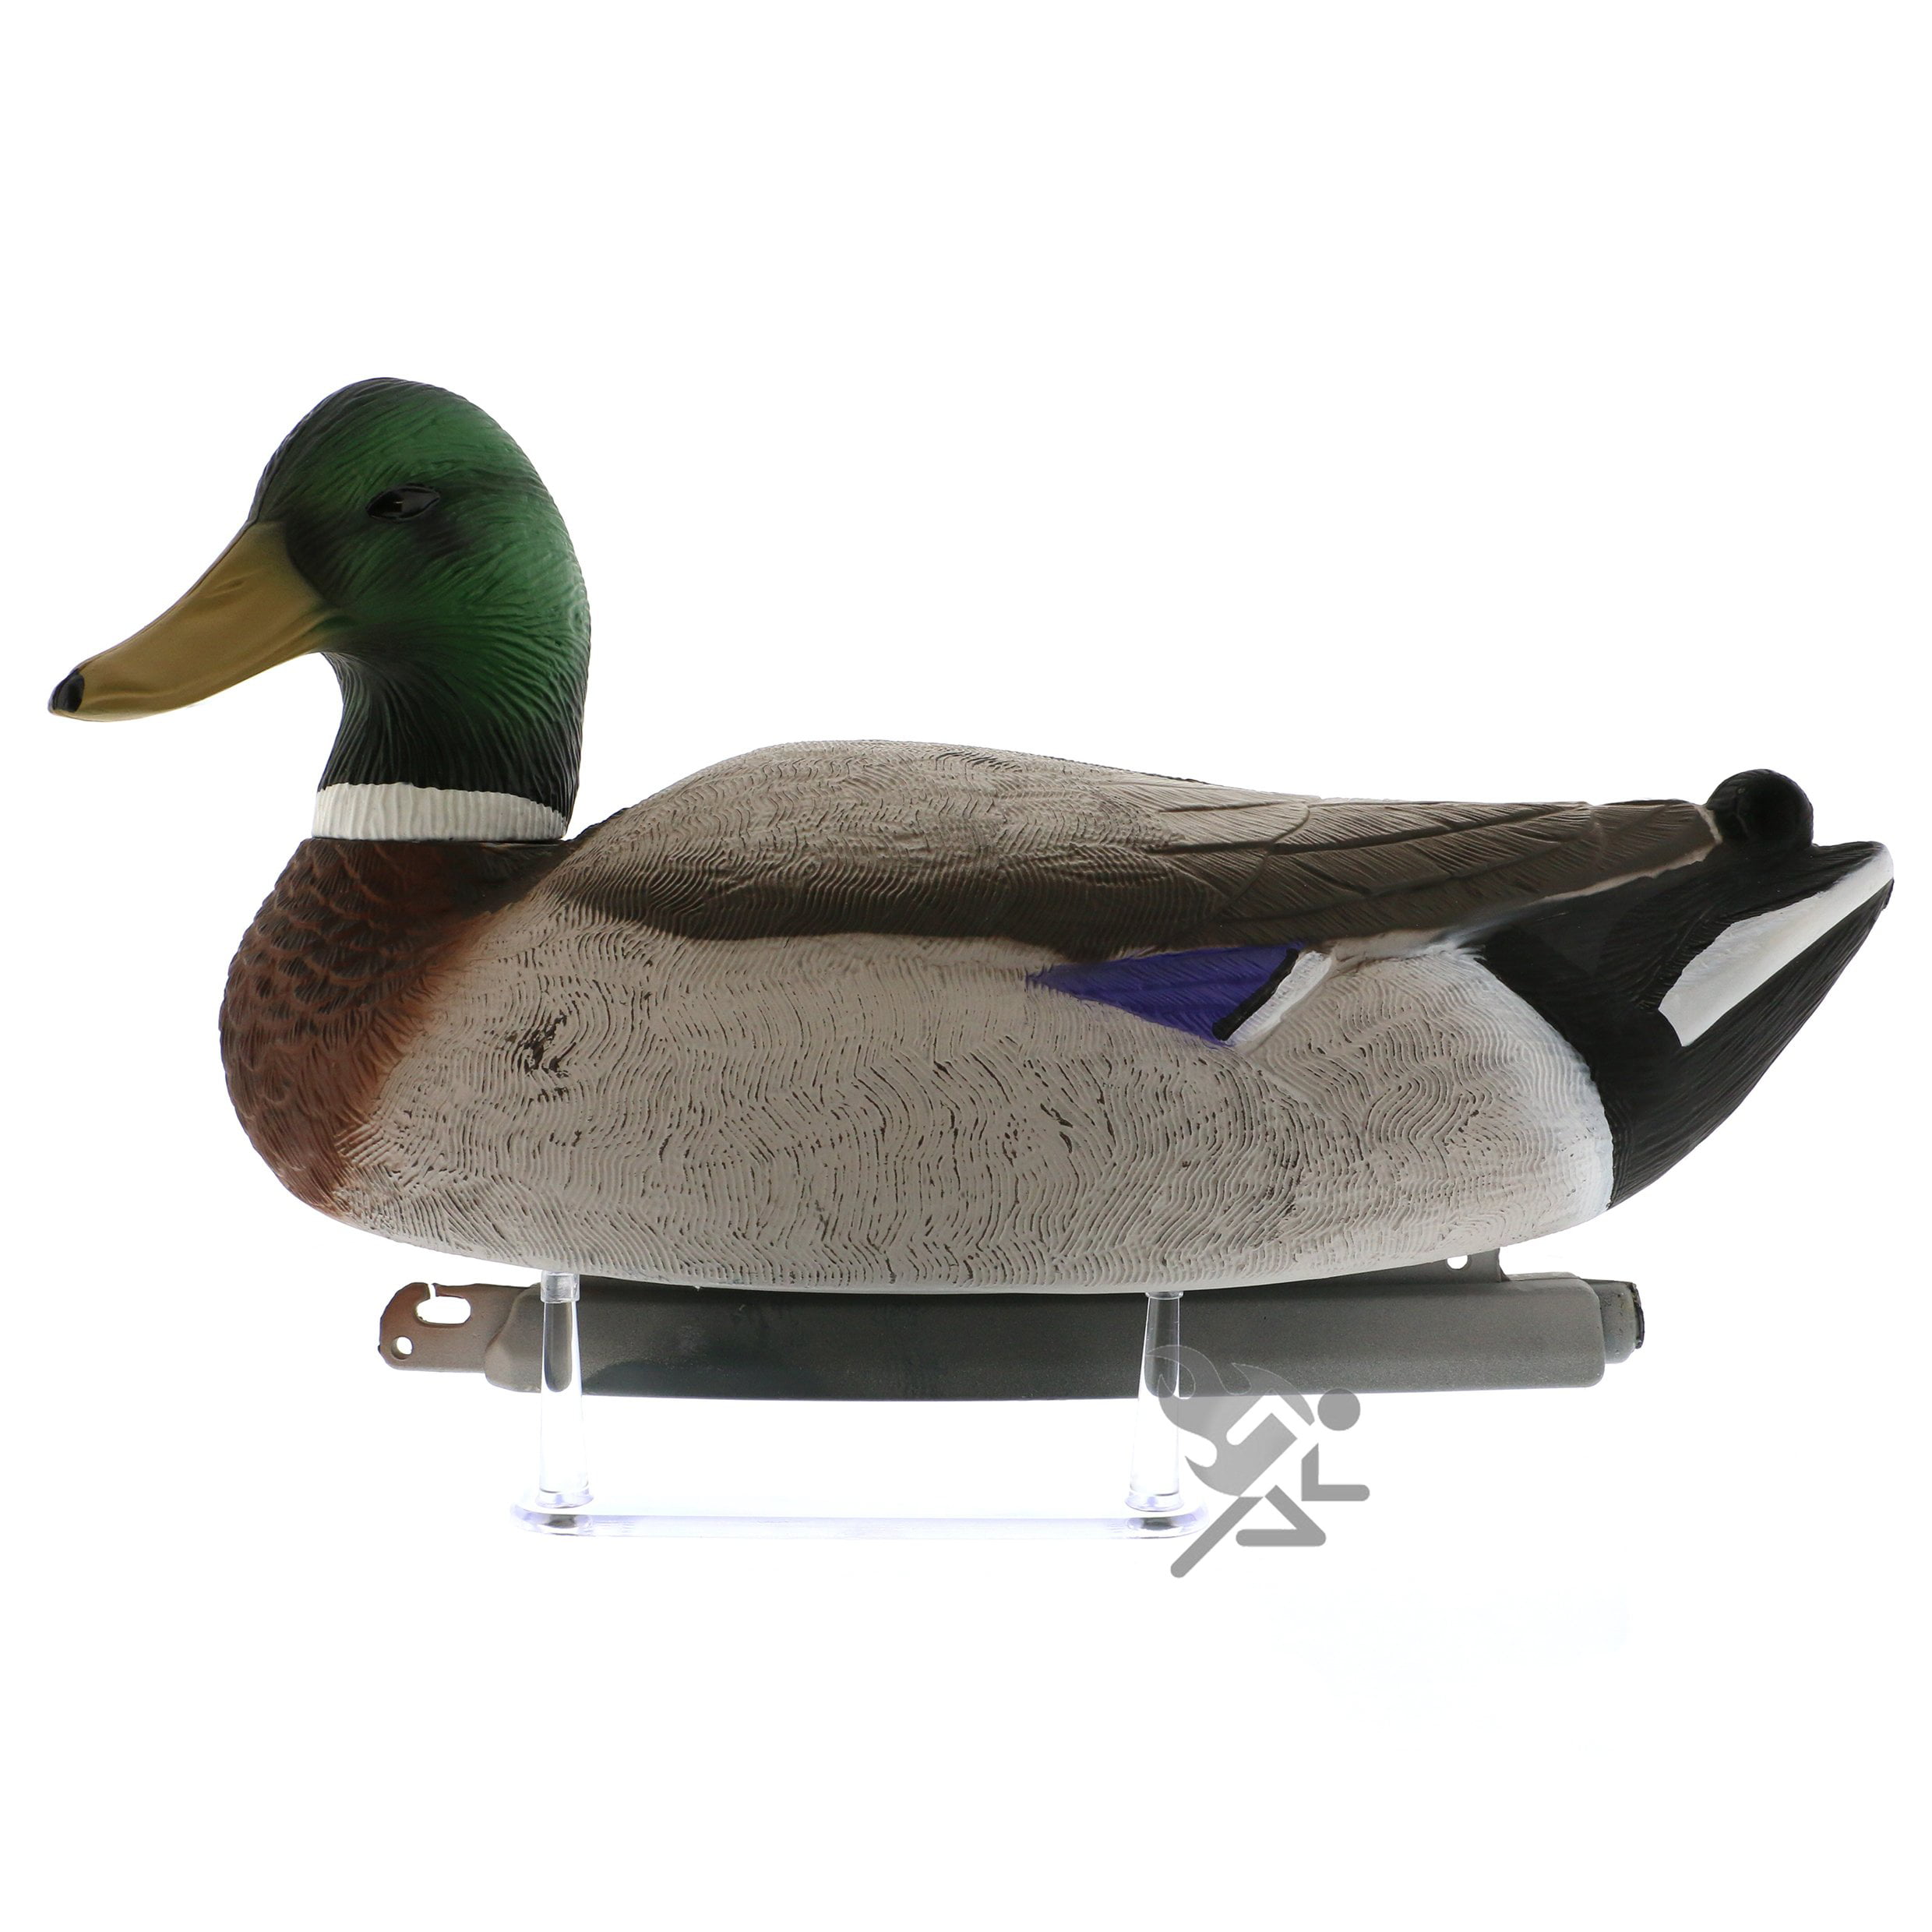 *3 Medium 4-1/4" Four Peg Display Stands For Duck Decoys 4 Geodes & Minerals 